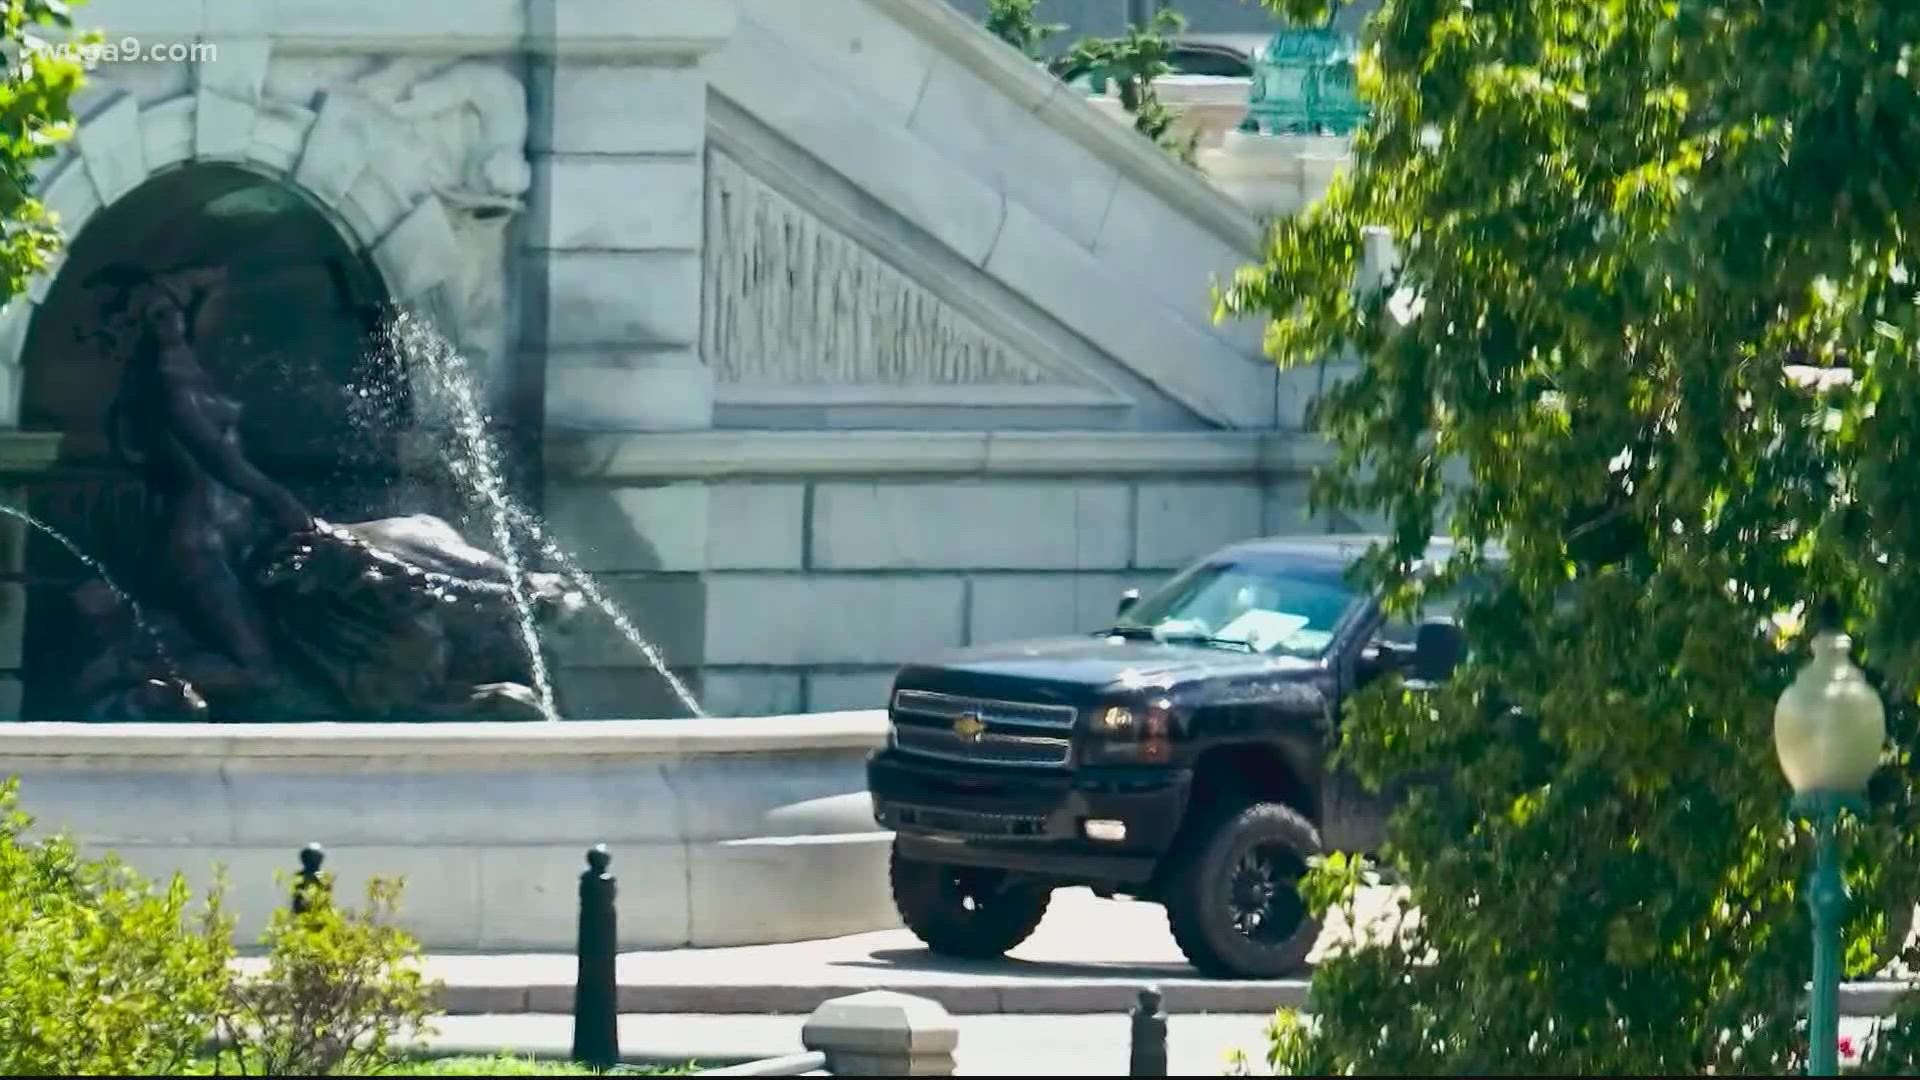 USCP spent 5 hours negotiating with a suspect in a black pickup truck, who pulled up on the sidewalk outside the Library of Congress, claiming to have explosives.